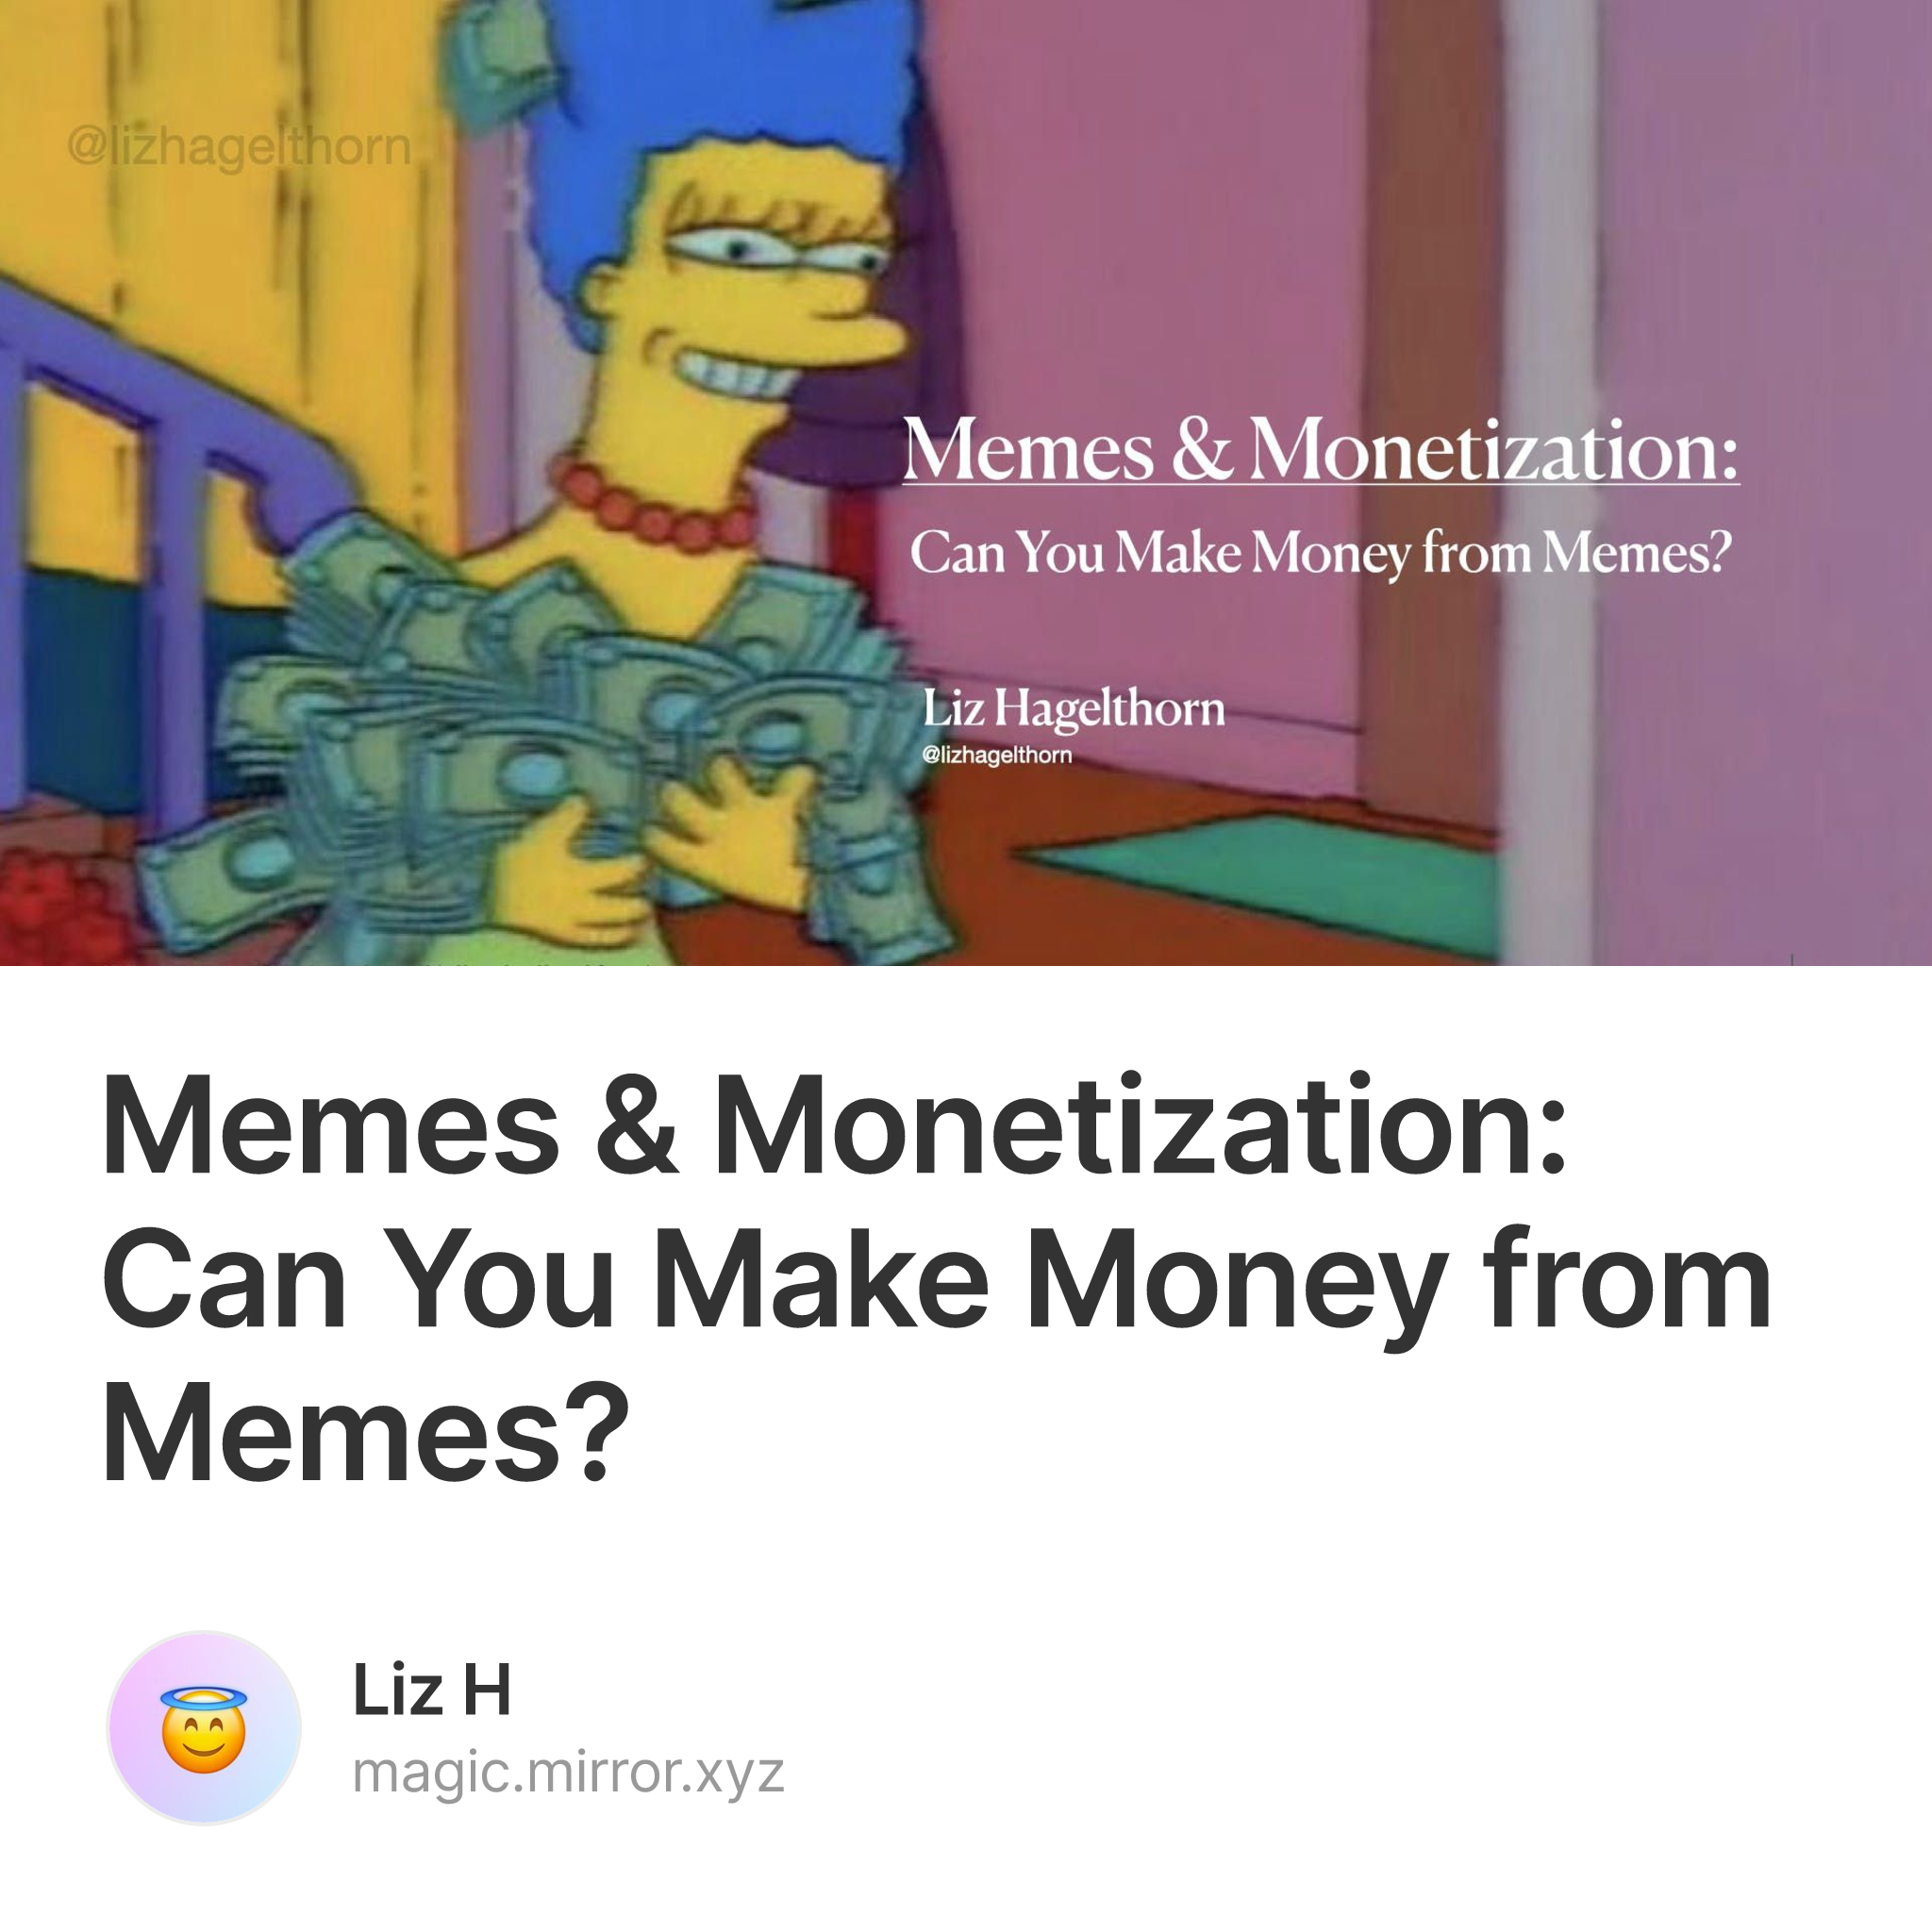 Here's How Much Money You Can Make With Memes